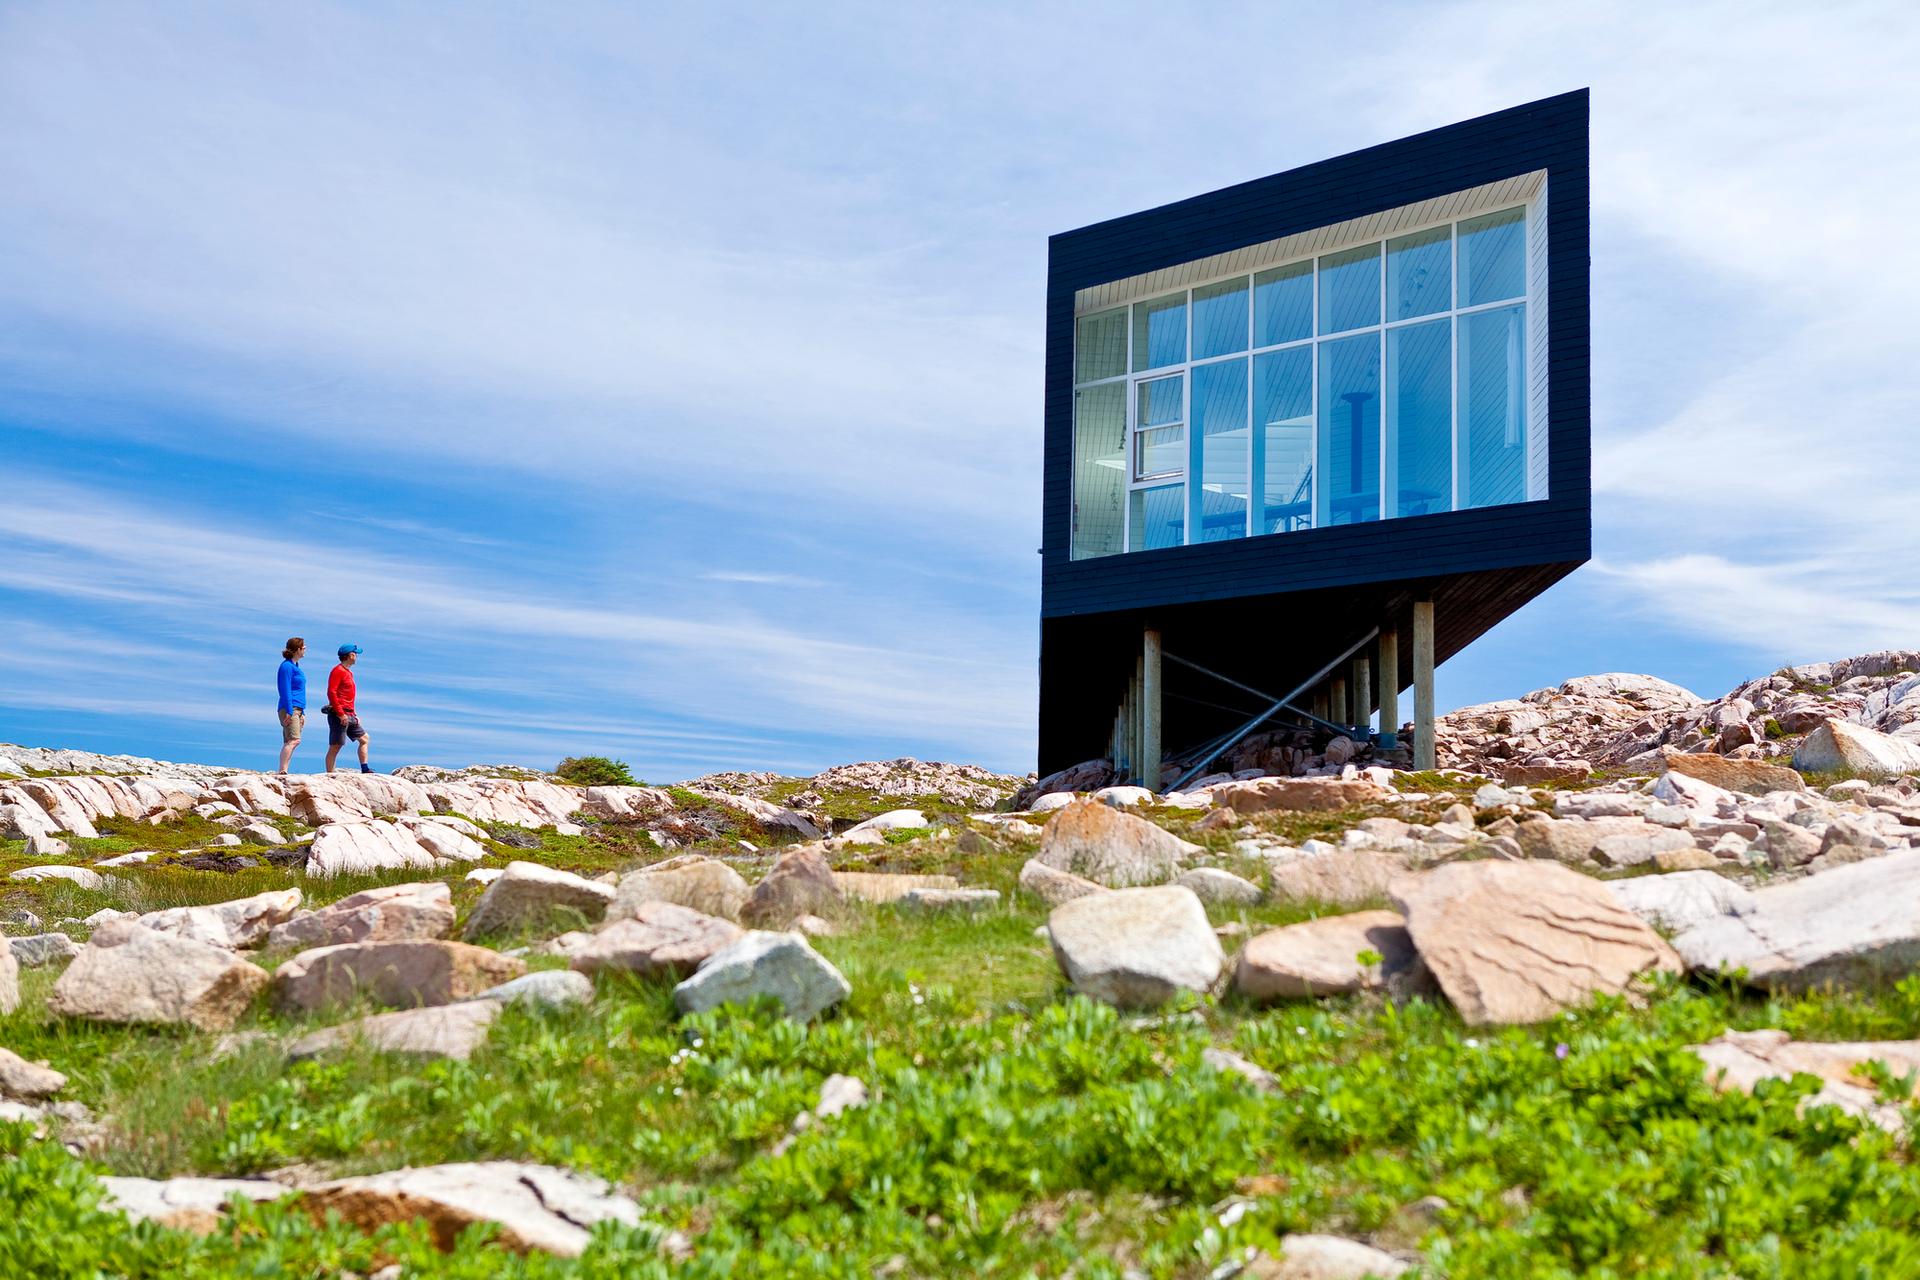 Two people walking along a rocky outcrop taking in the view of the Fogo Island Inn